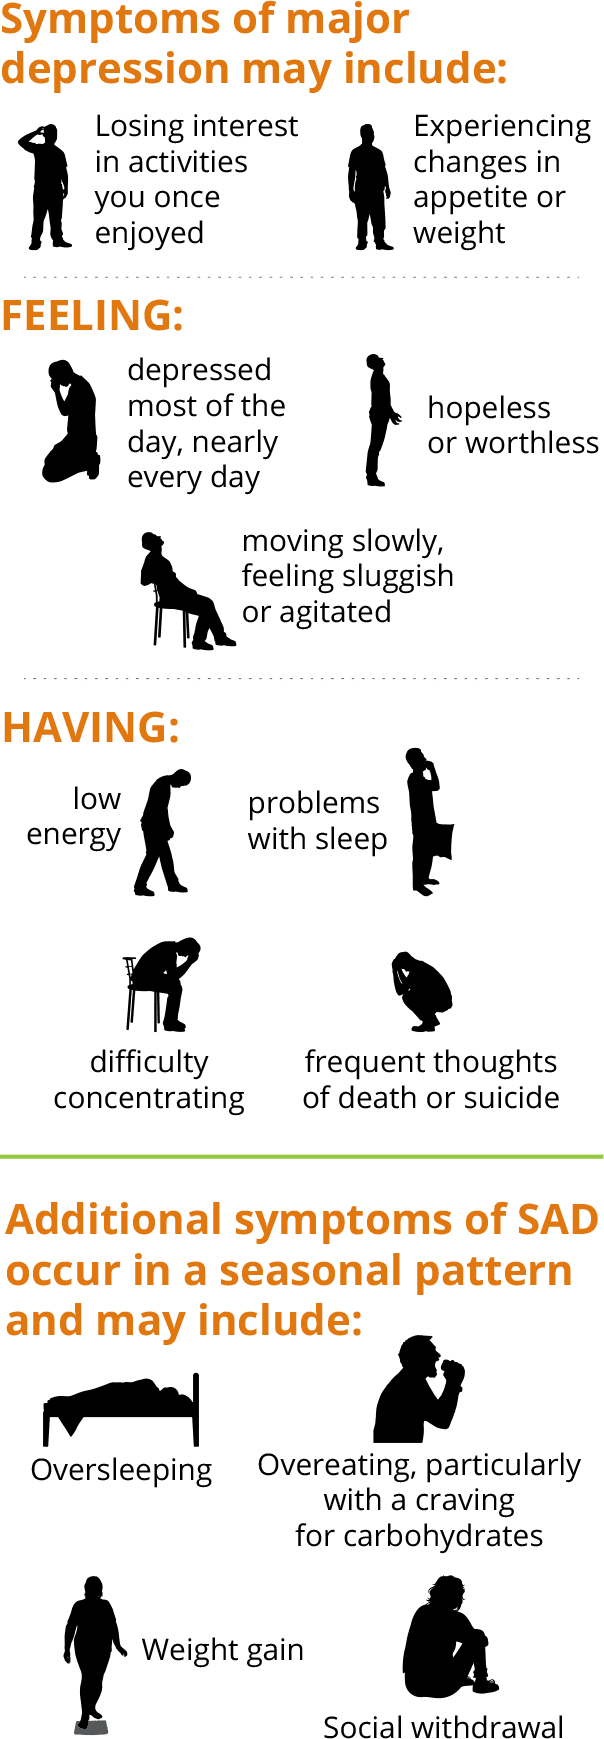 graphic of common symptoms of major depressive disorder and additional symptoms of seasonal affective disorder